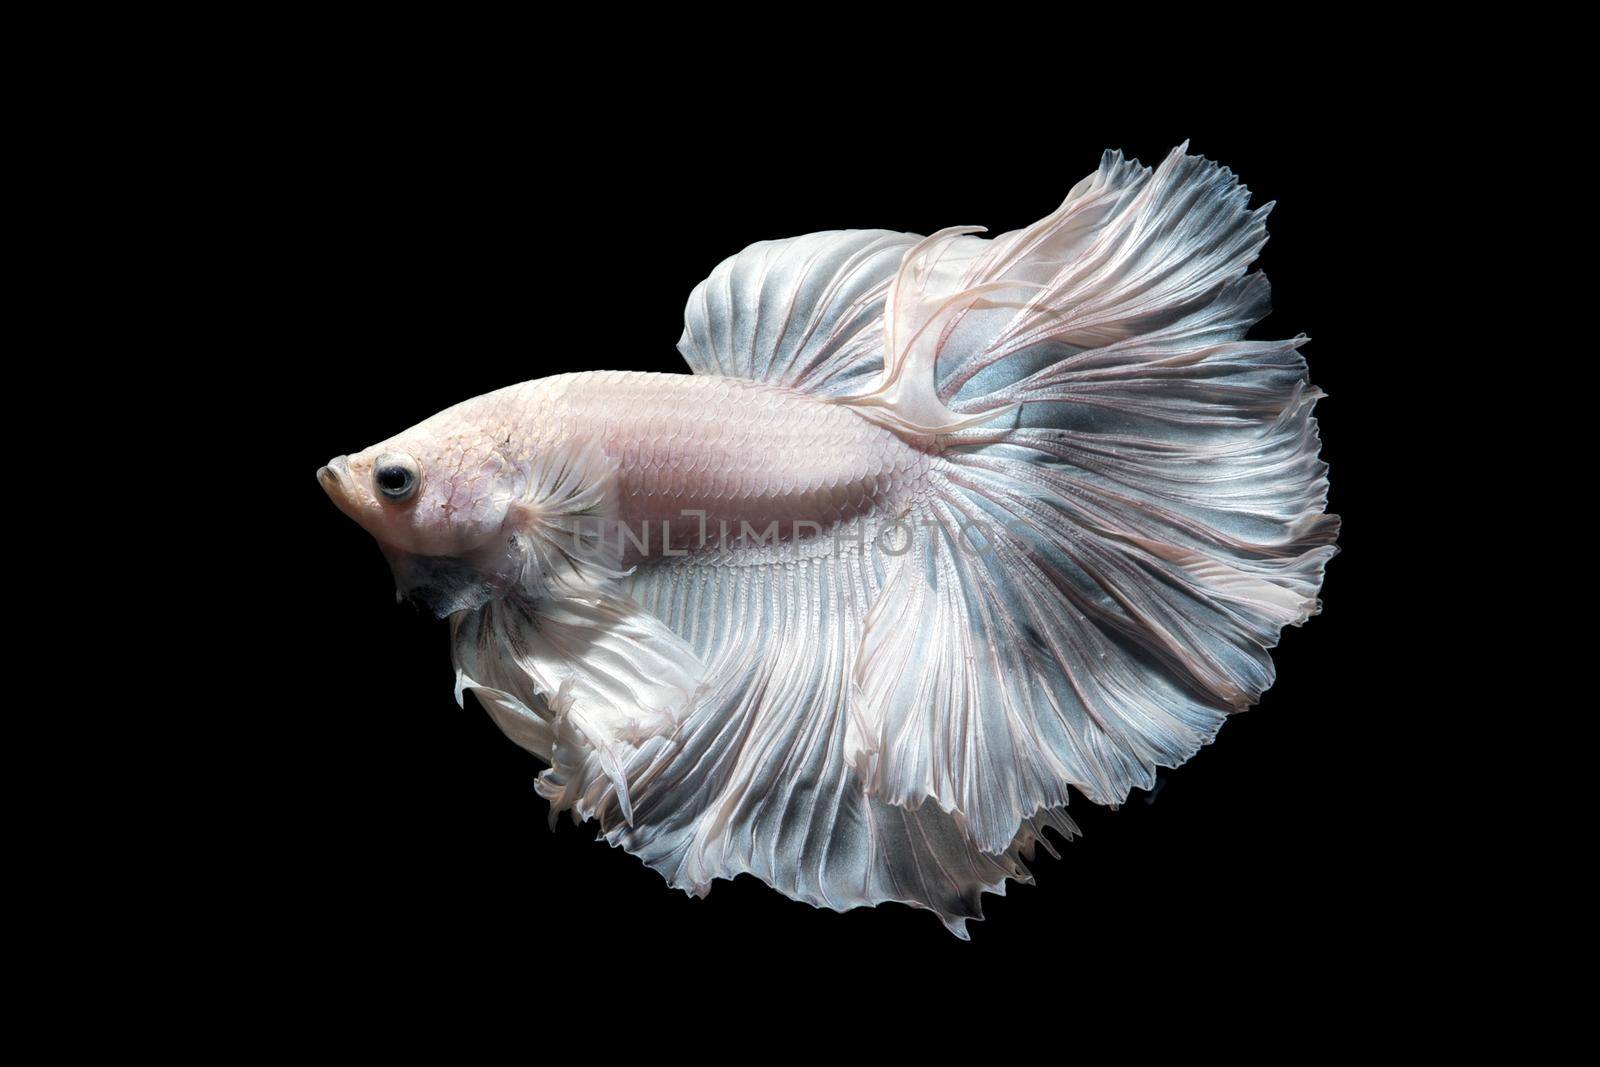 Betta fish or Siamese fighting fish in movement isolated on black background. by Nuamfolio